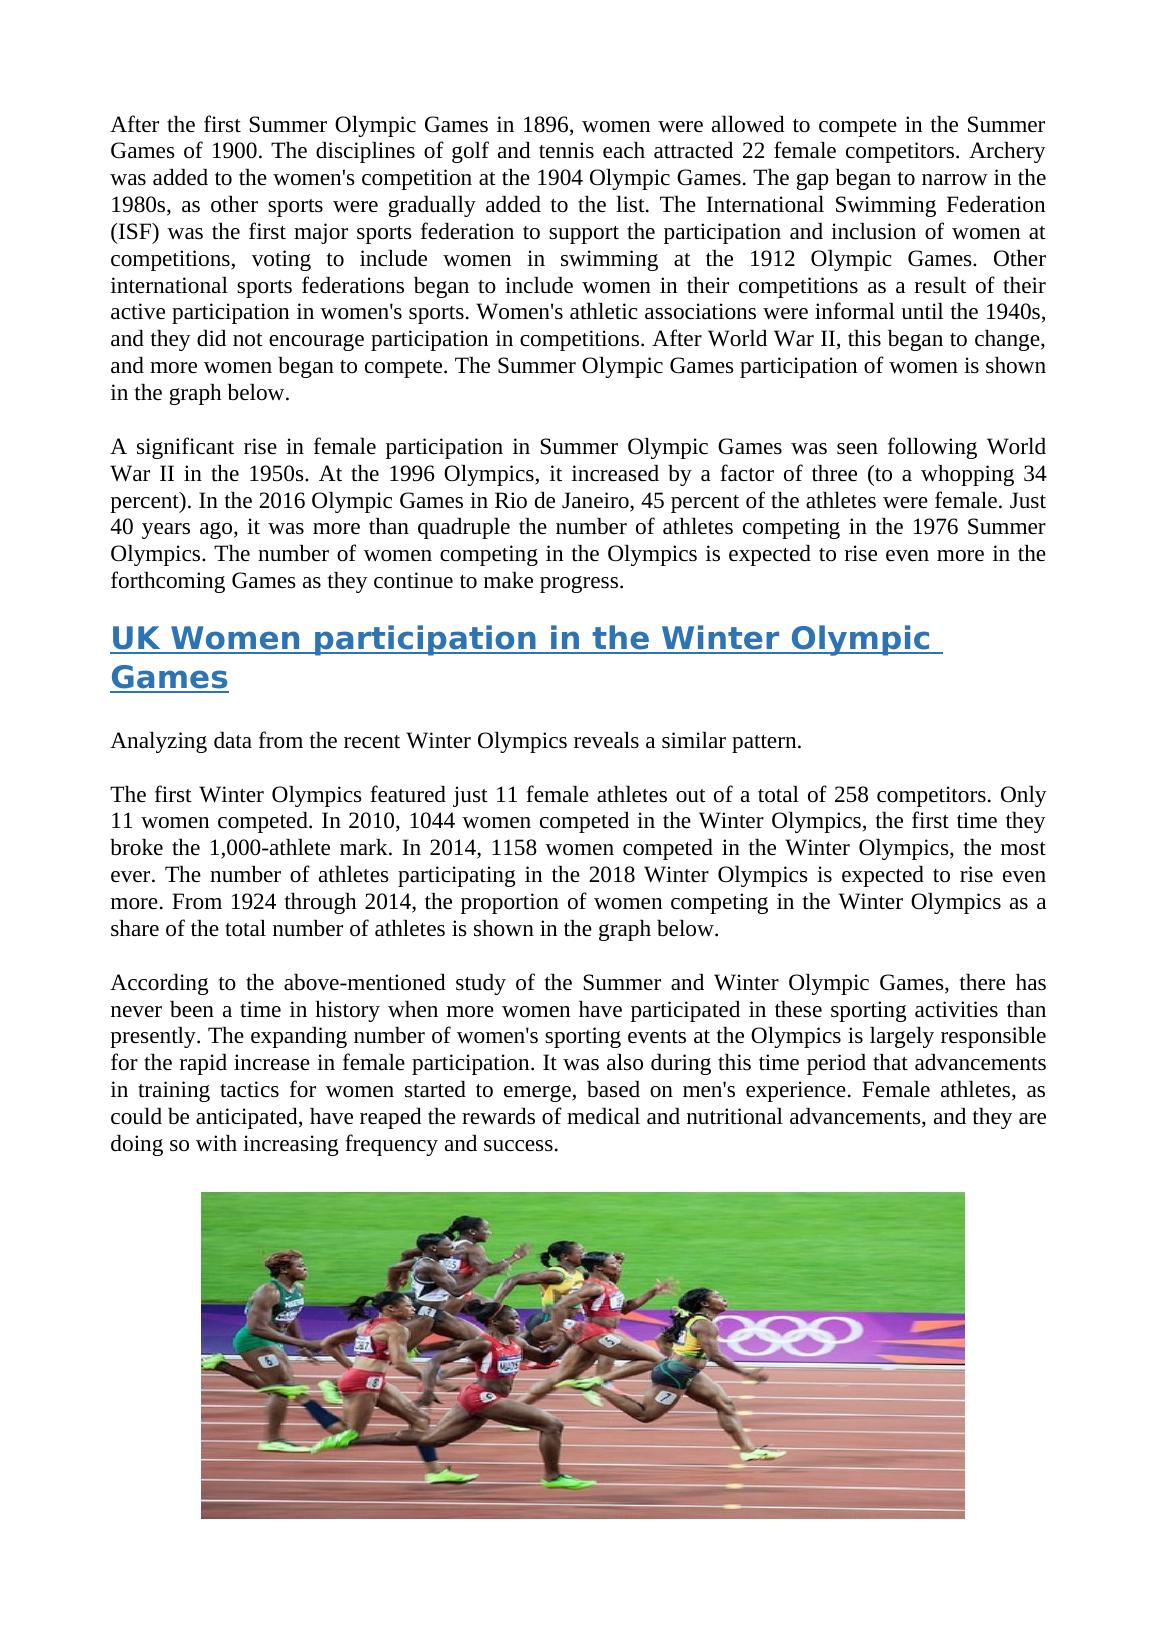 Case Study on Women's Involvement in Sports in UK_3